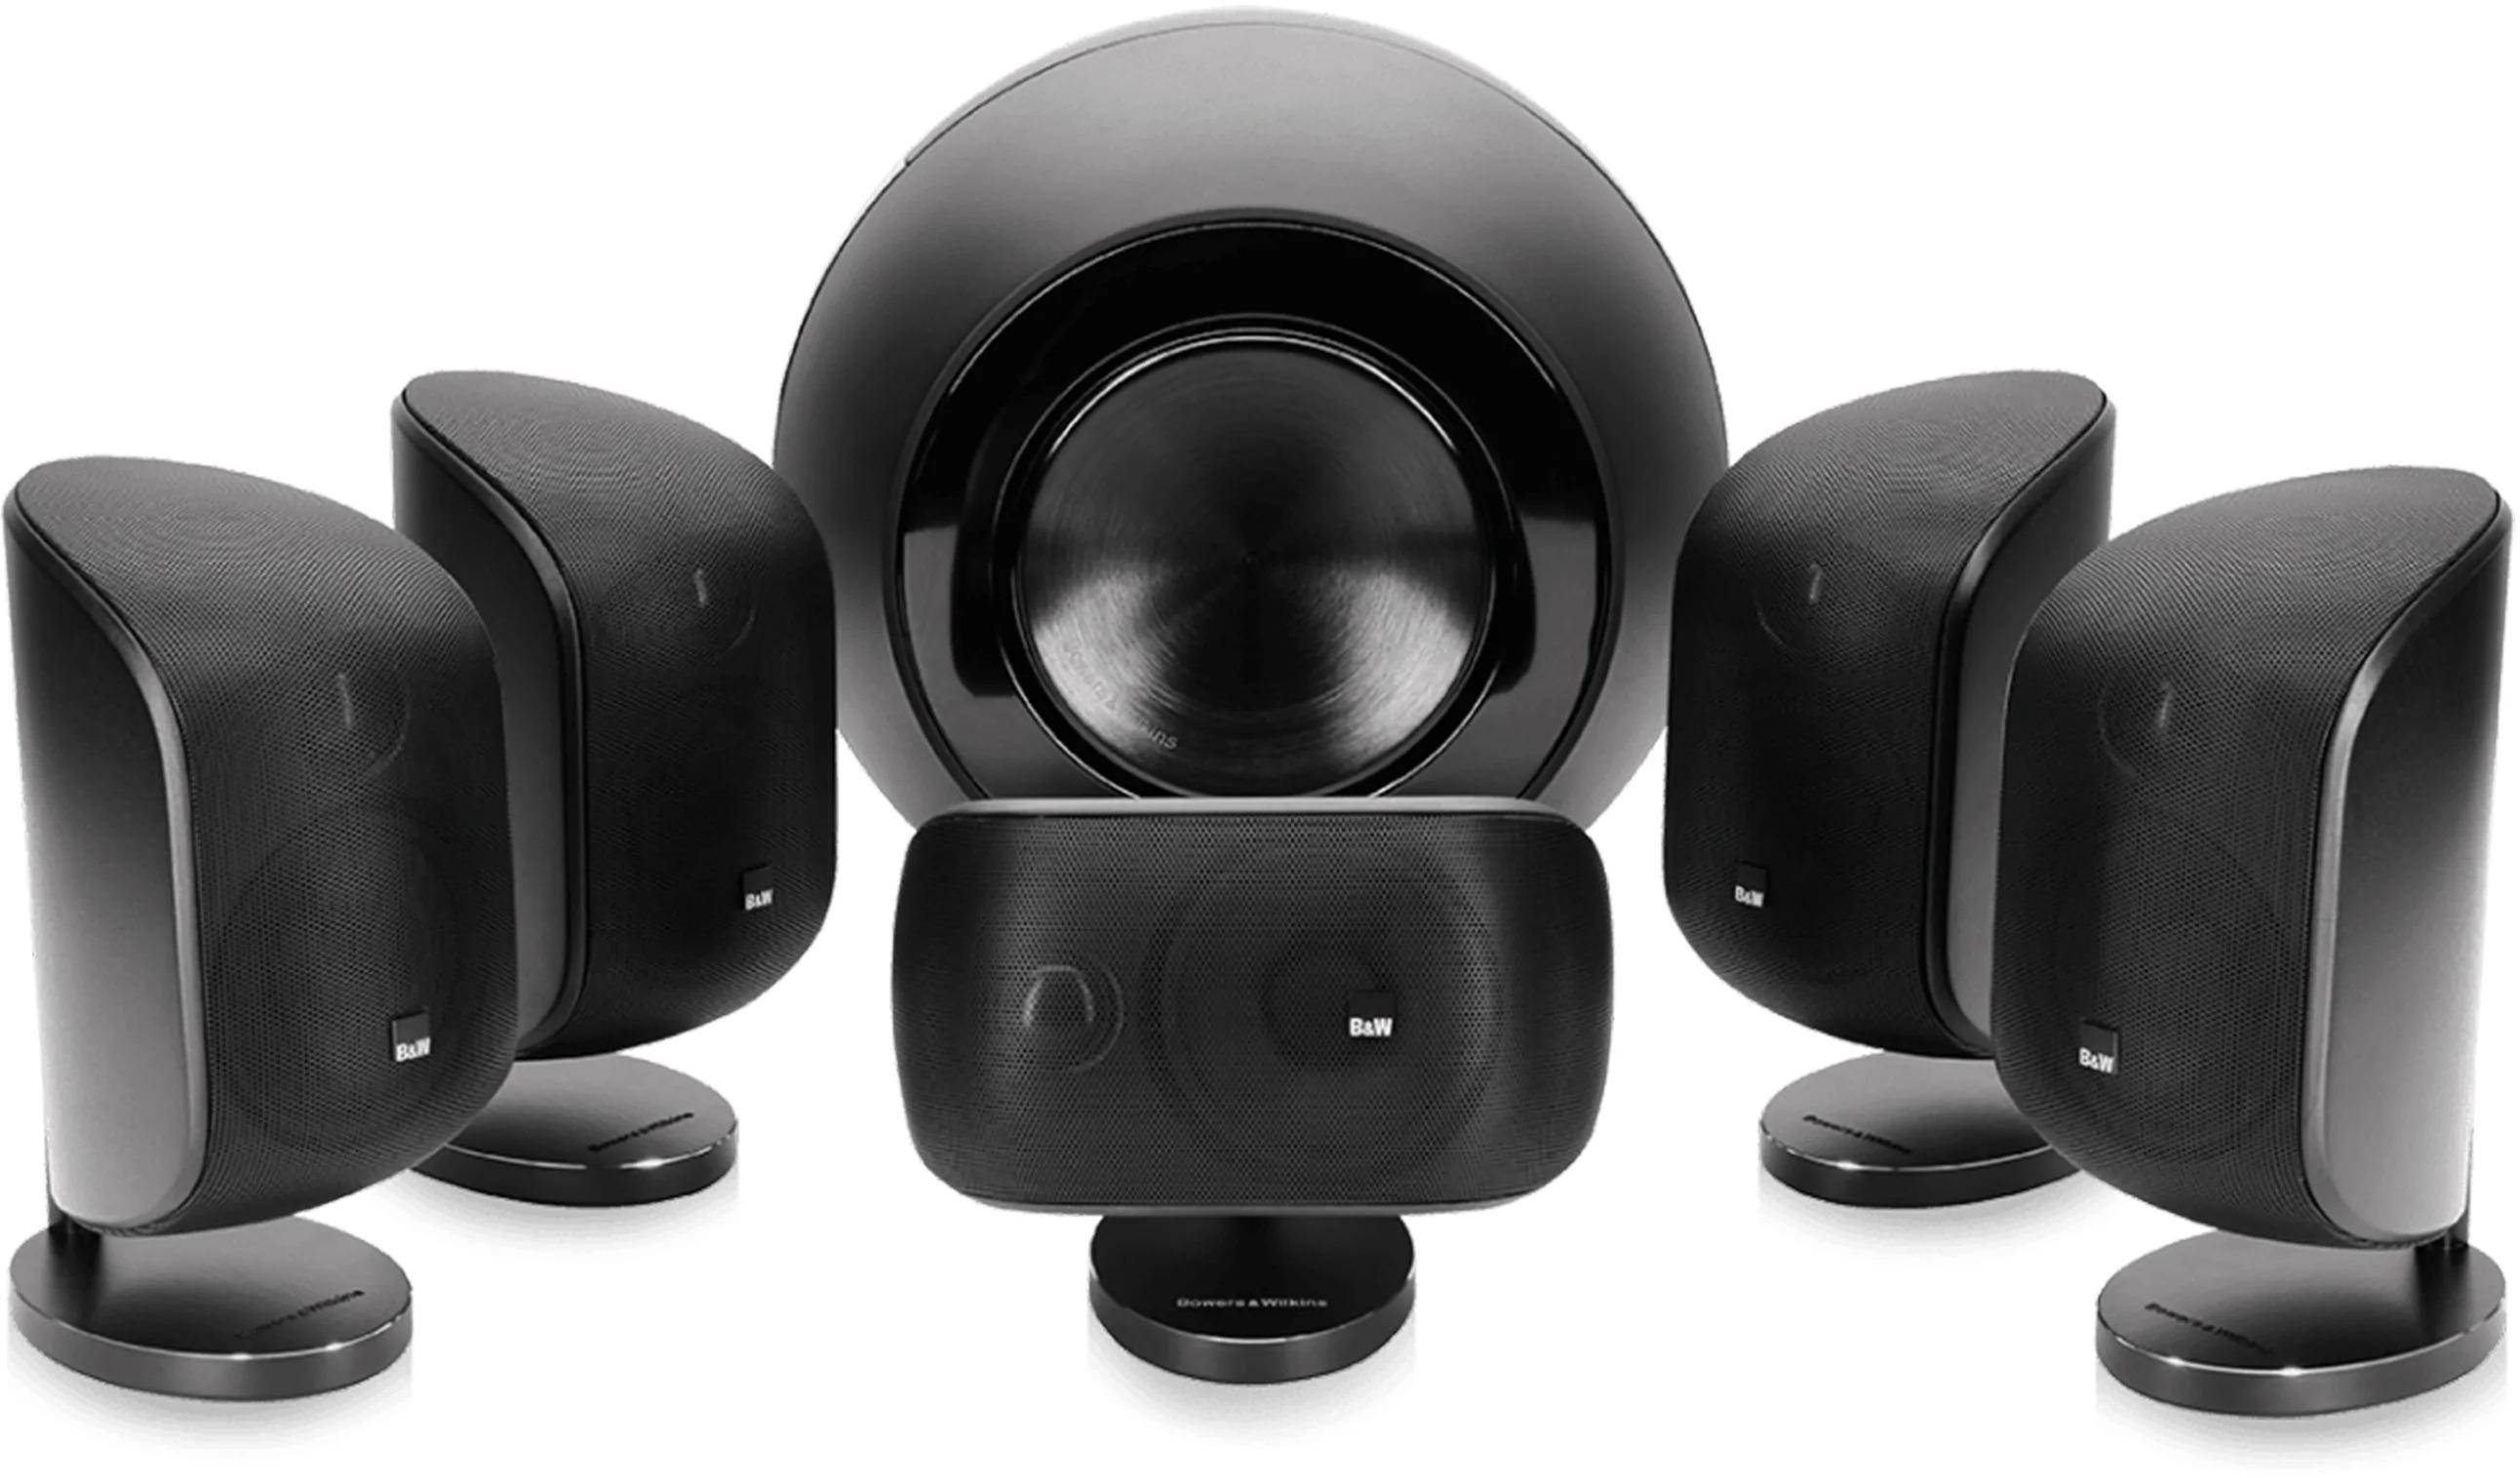 Bowers-Wilkins MT-60-5.1 Satellites Speaker-PV1D Compact Subwoofers zoom image